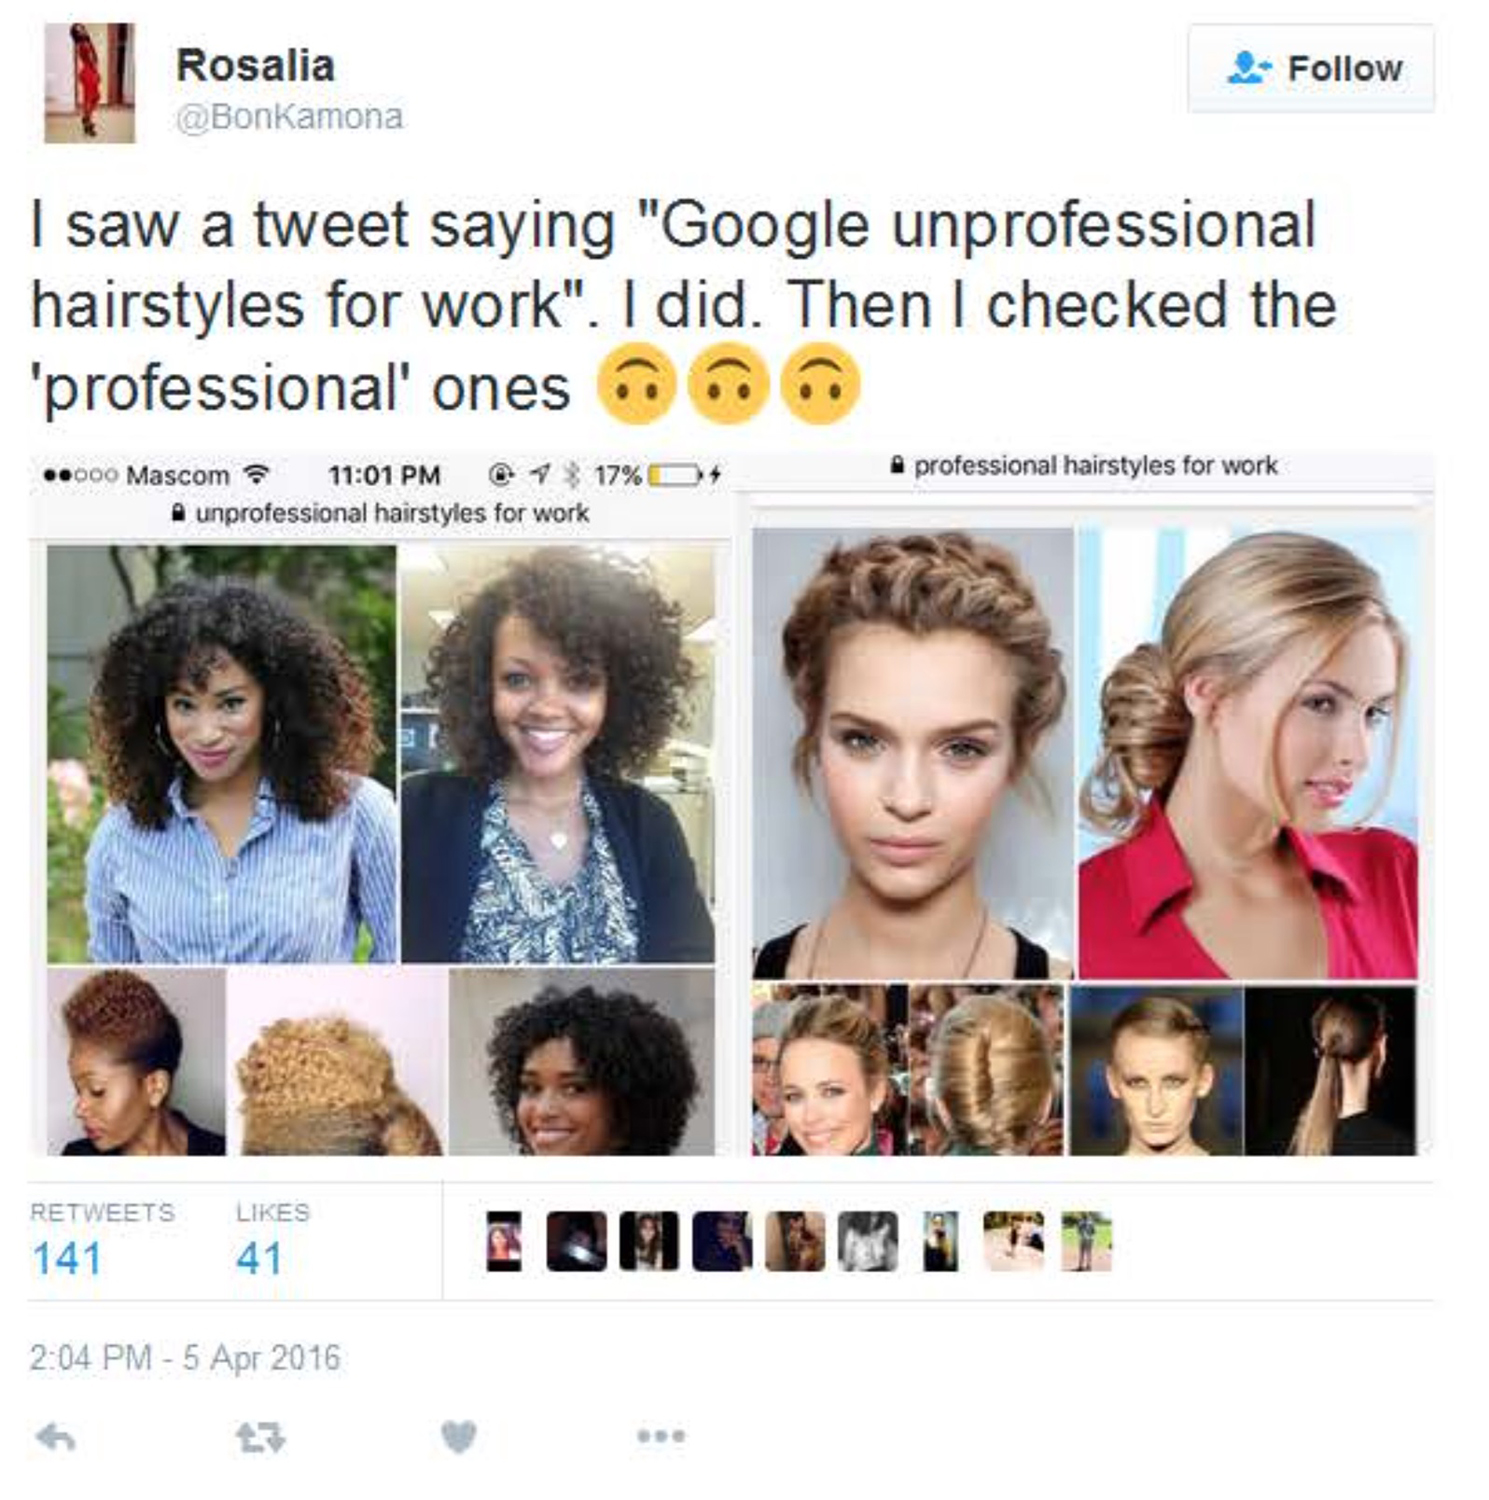 Tweet about Google searches on “unprofessional hairstyles for work,” which all feature Black women, while “professional hairstyles for work” feature White women, April 7, 2016. (Courtesy Safiya Noble)